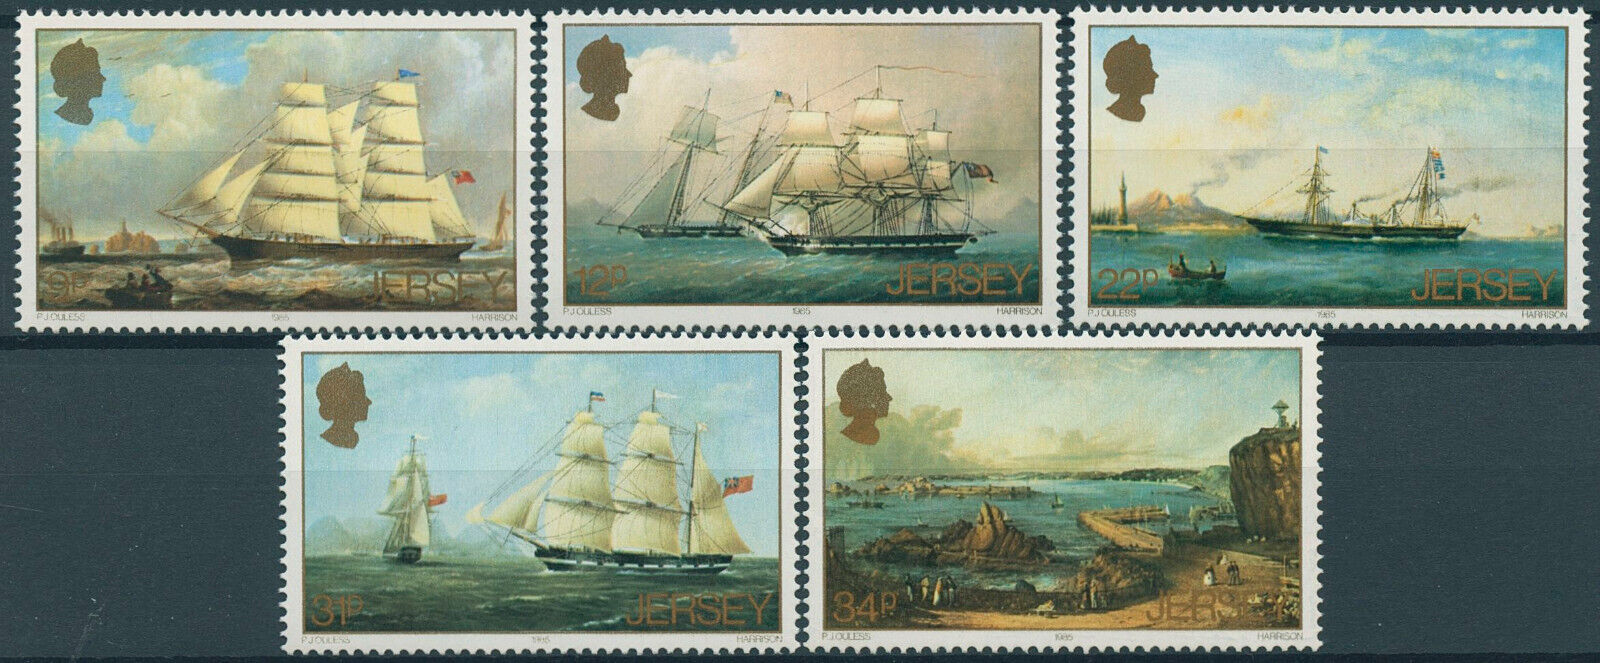 Jersey 1985 MNH Art Stamps Philip John Ouless Paintings Ships Nautical 5v Set